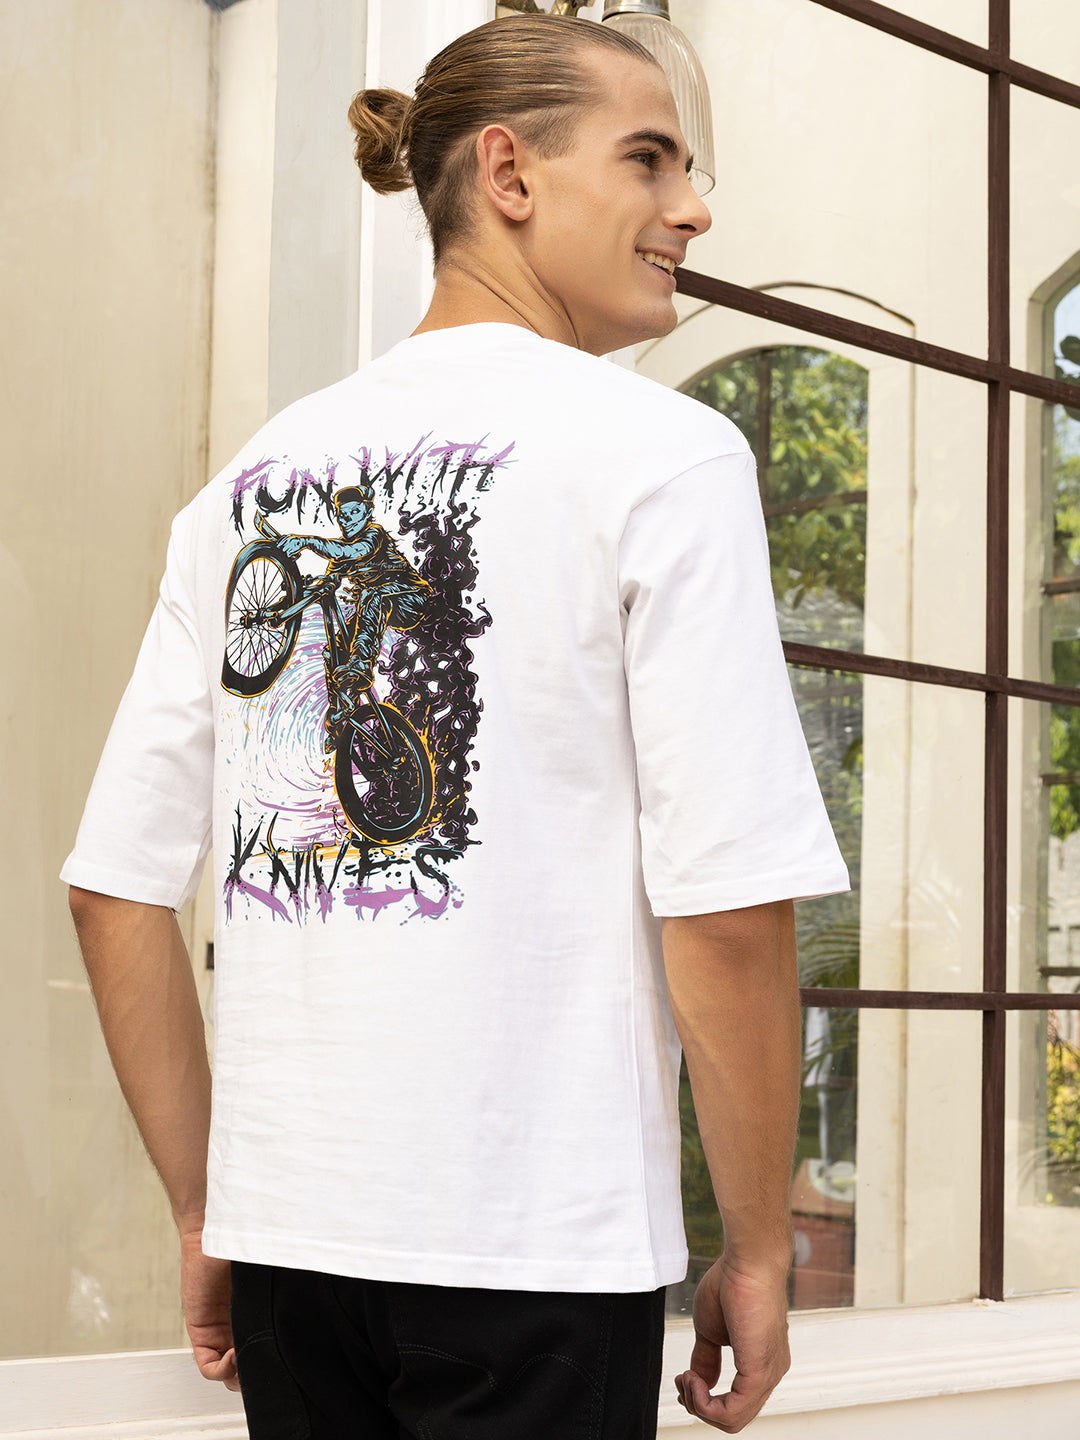 Fun With Knives White Oversized Tshirt by Gavin Paris